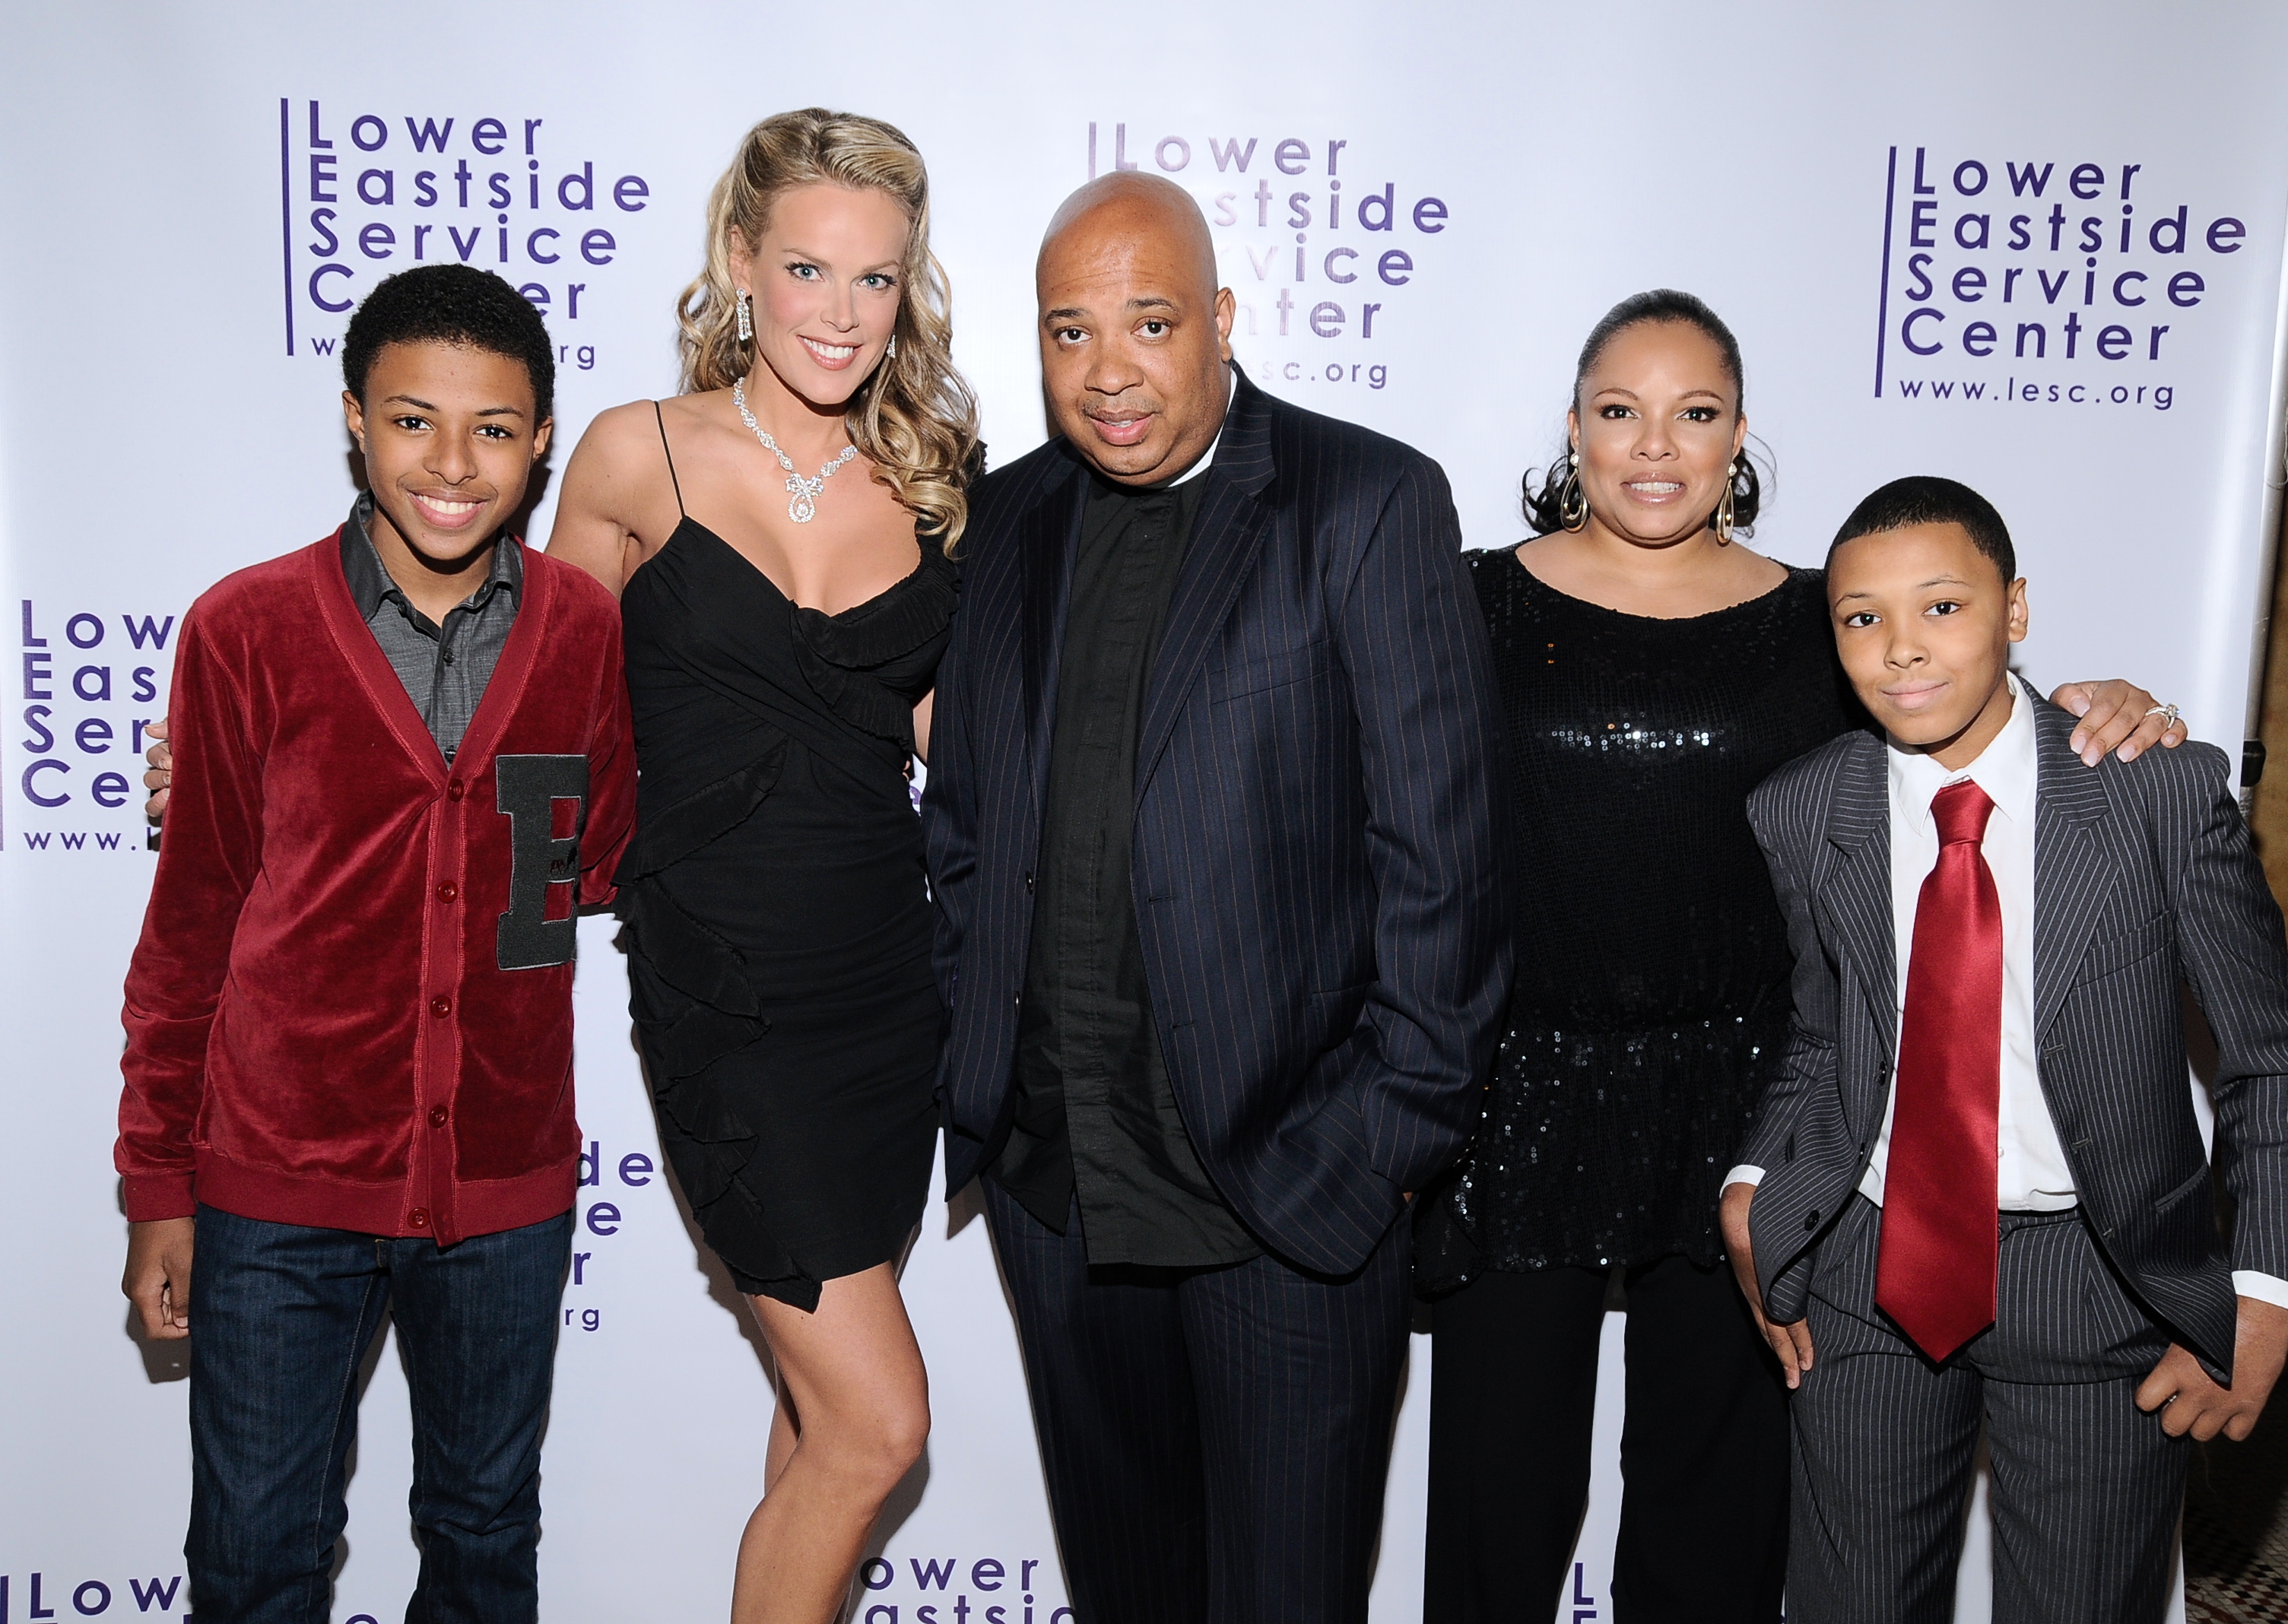 Diggy Simmons, Heidi Albertsen, Reverend Run, Justine Simmons, and Russy Simmons at a fundraiser for the Lower Eastside Service Center, May, 2010.